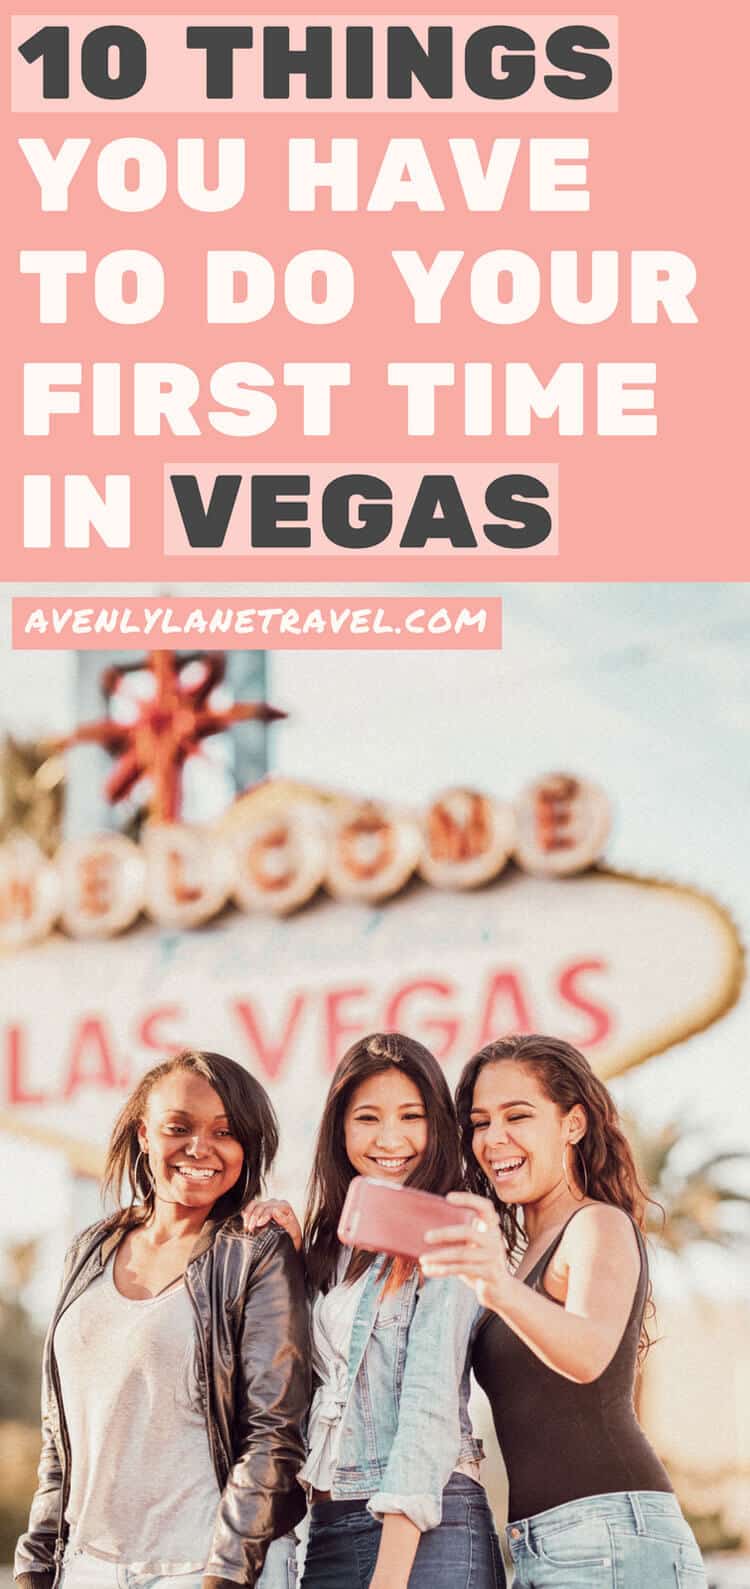 Top 10 Must do's in Vegas for First Timer's!